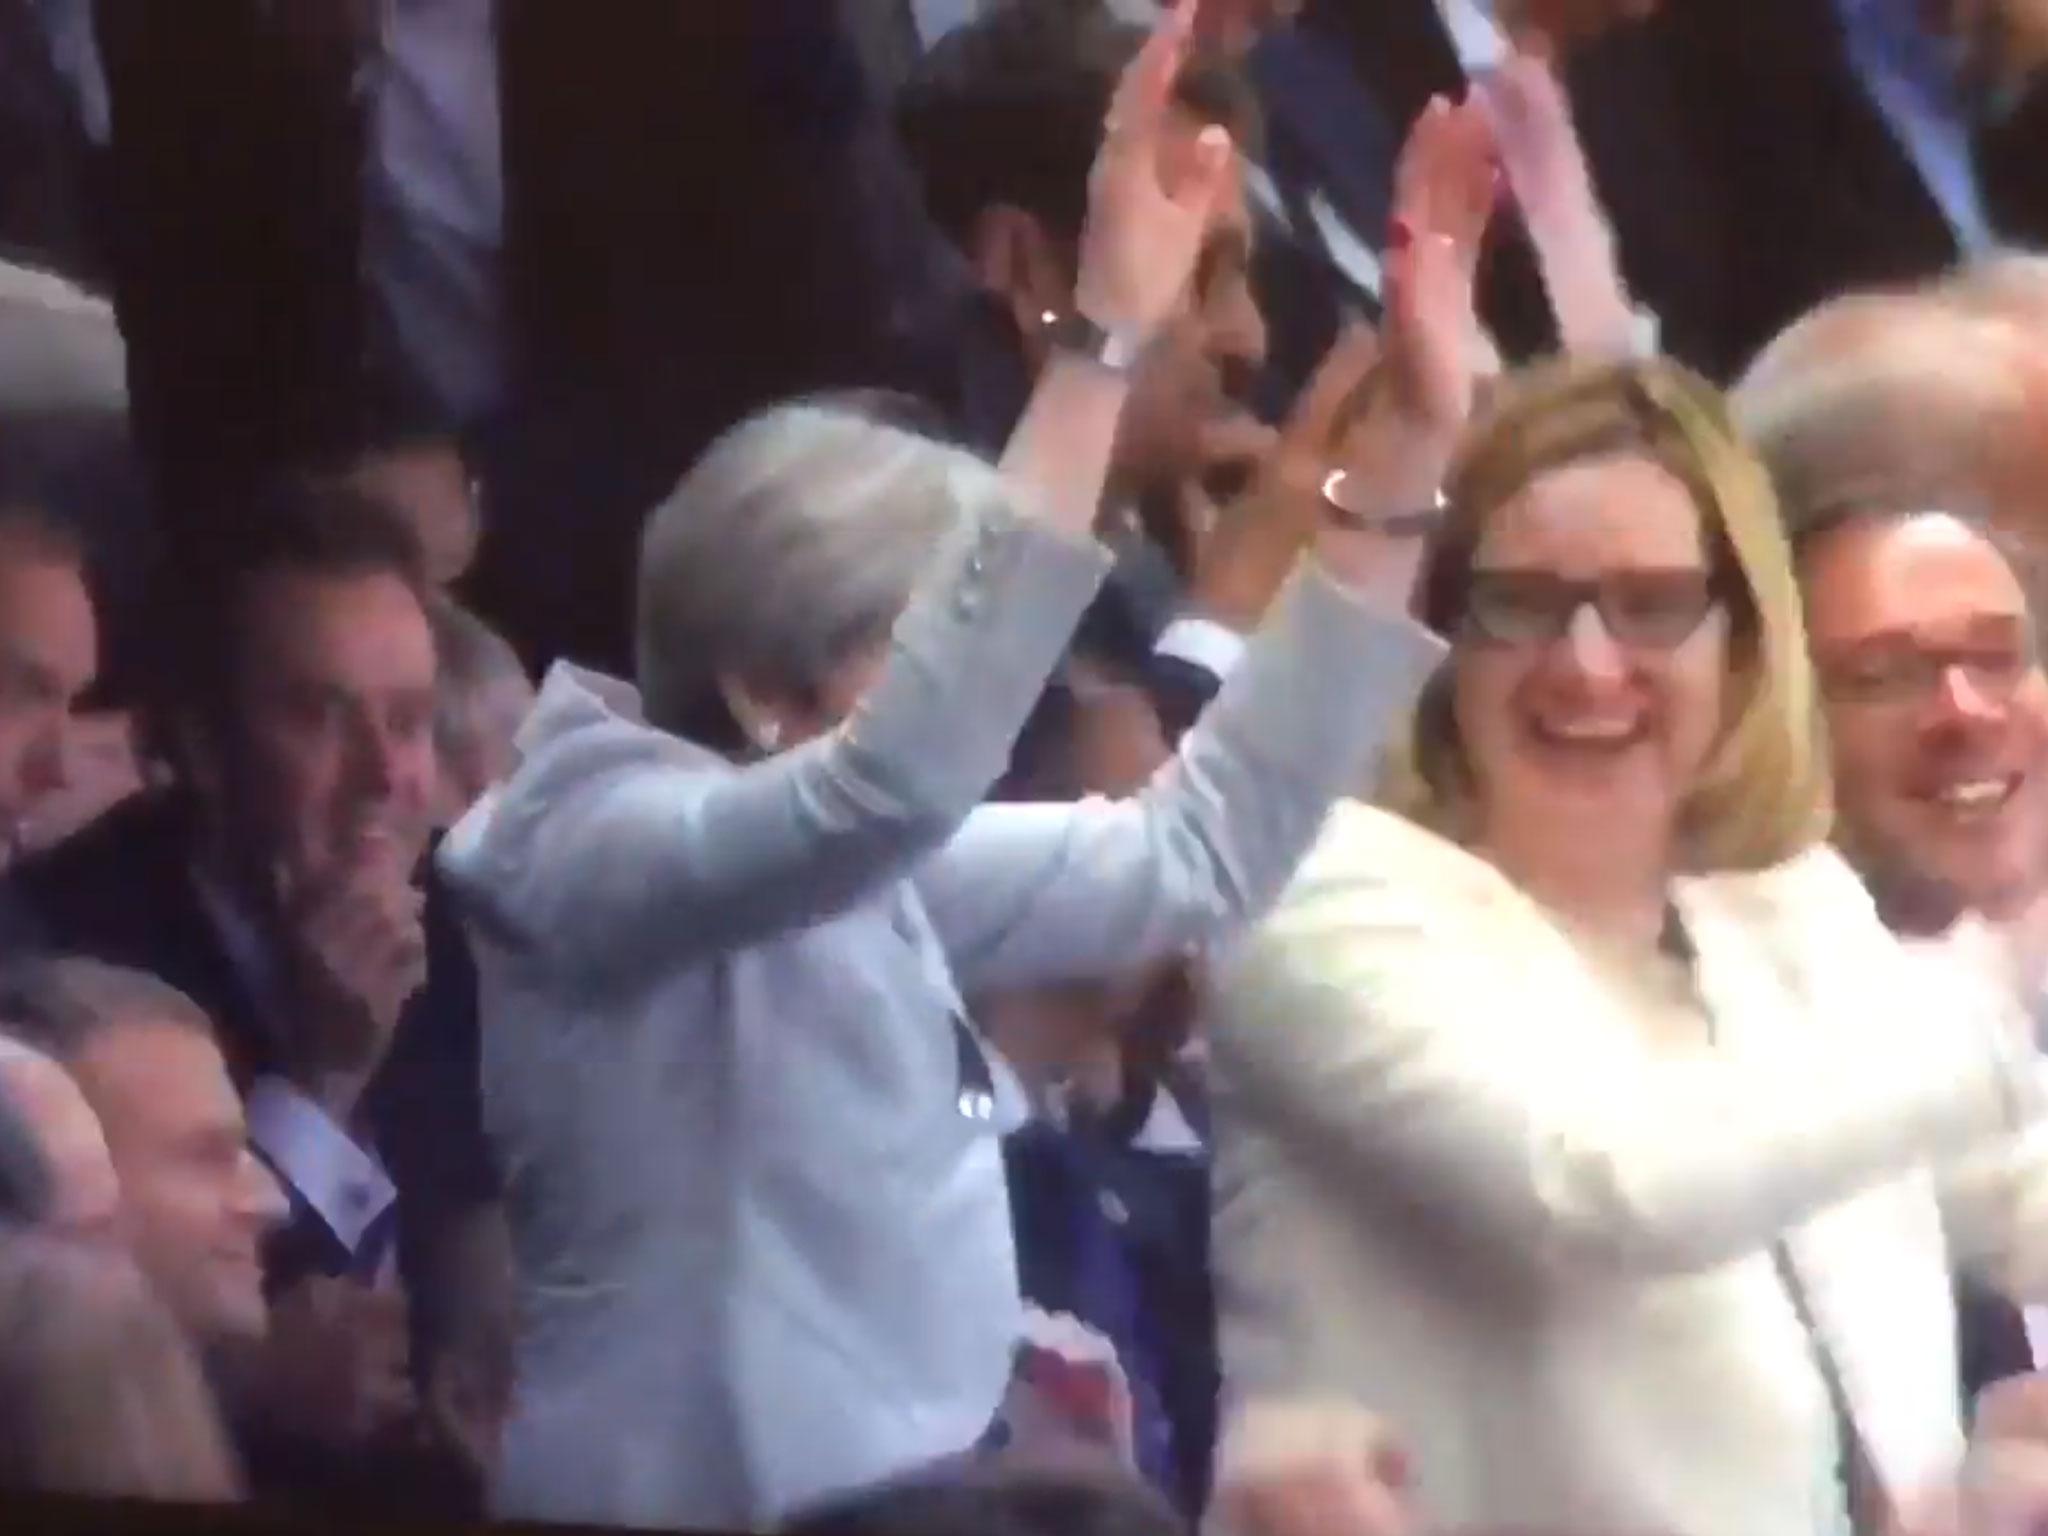 Theresa May attempting a Mexican wave during an England v France friendly football match